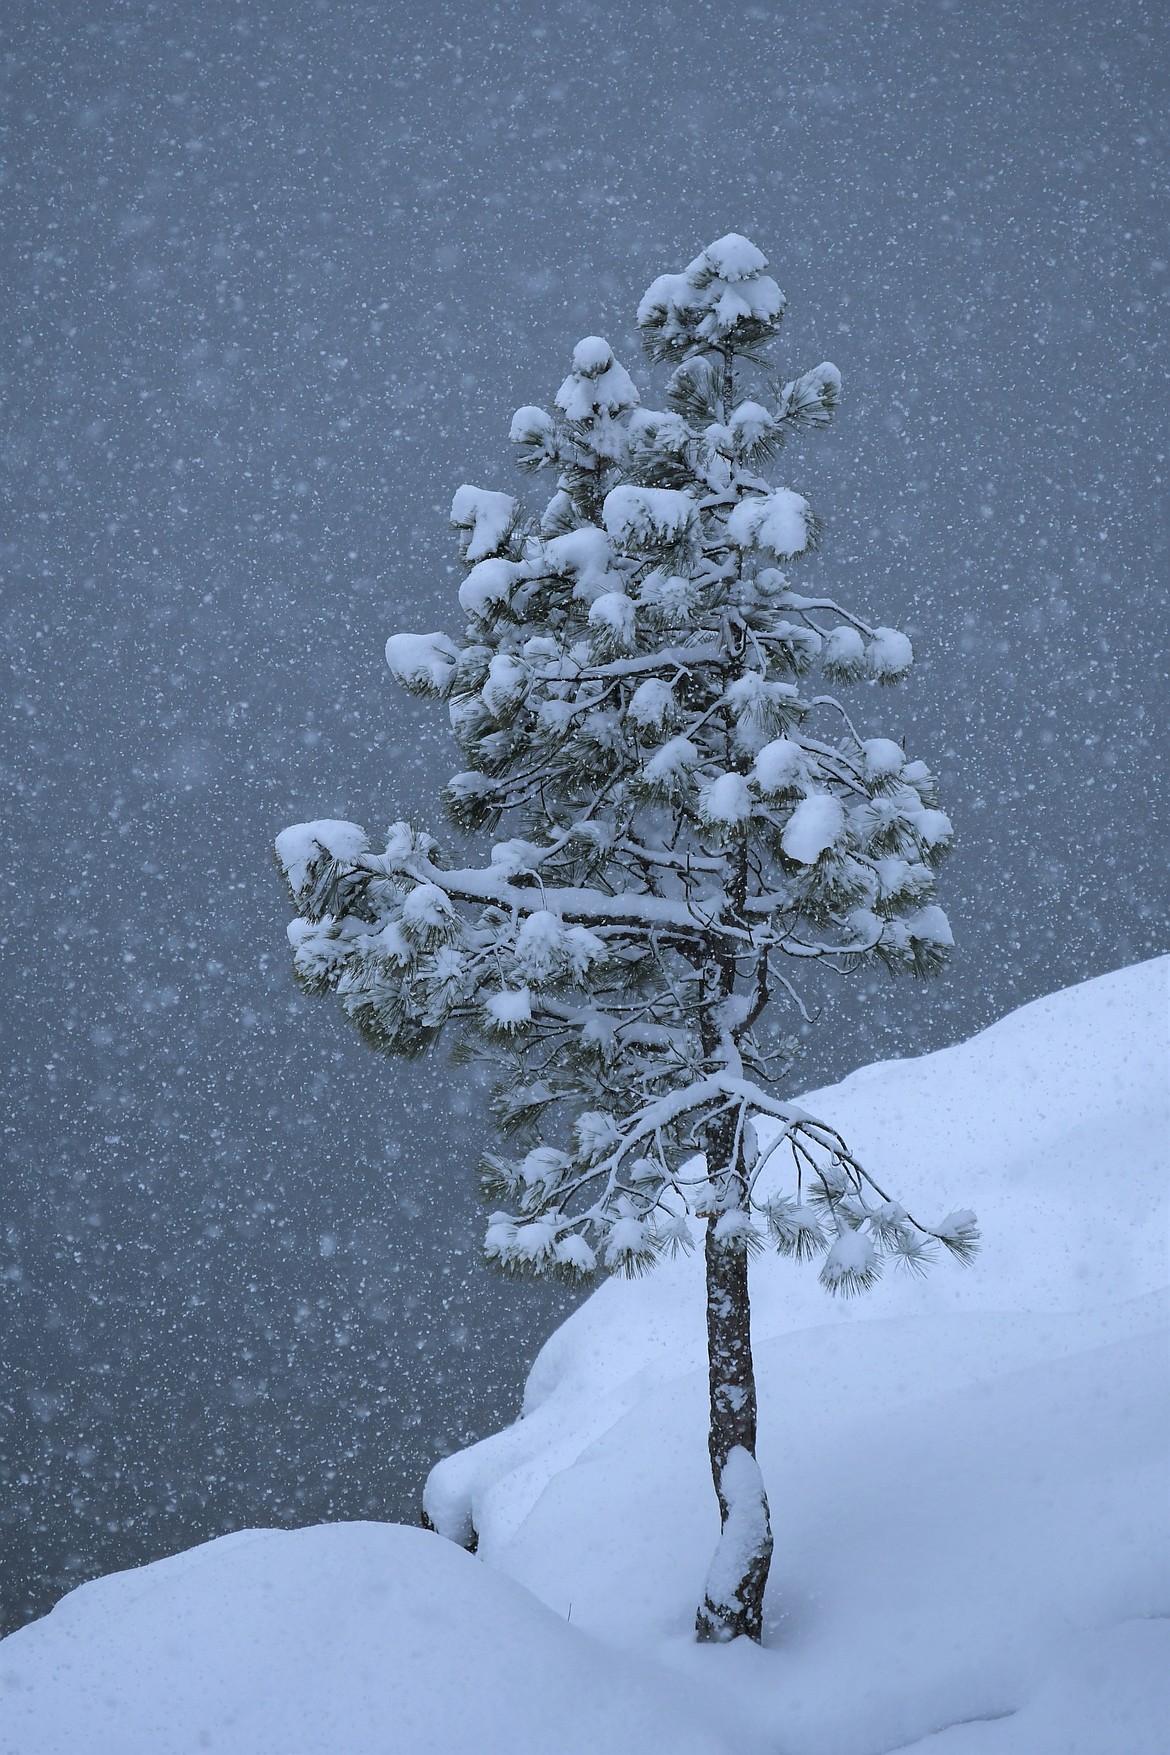 George Sayler submitted this snowy picture of a tree taken on Thursday.